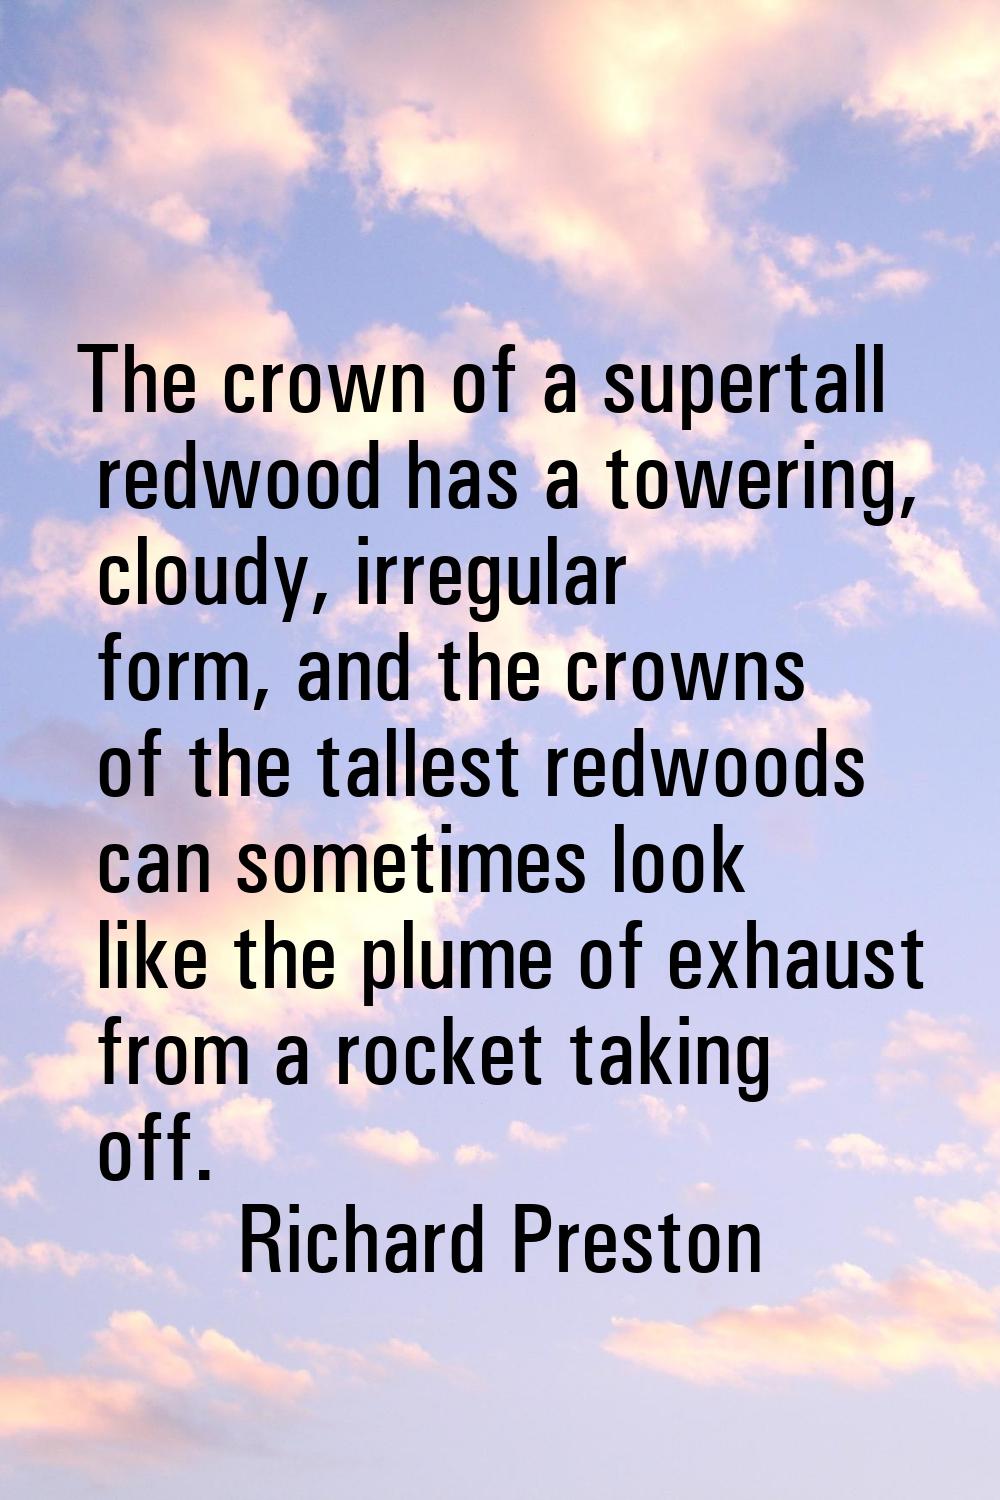 The crown of a supertall redwood has a towering, cloudy, irregular form, and the crowns of the tall